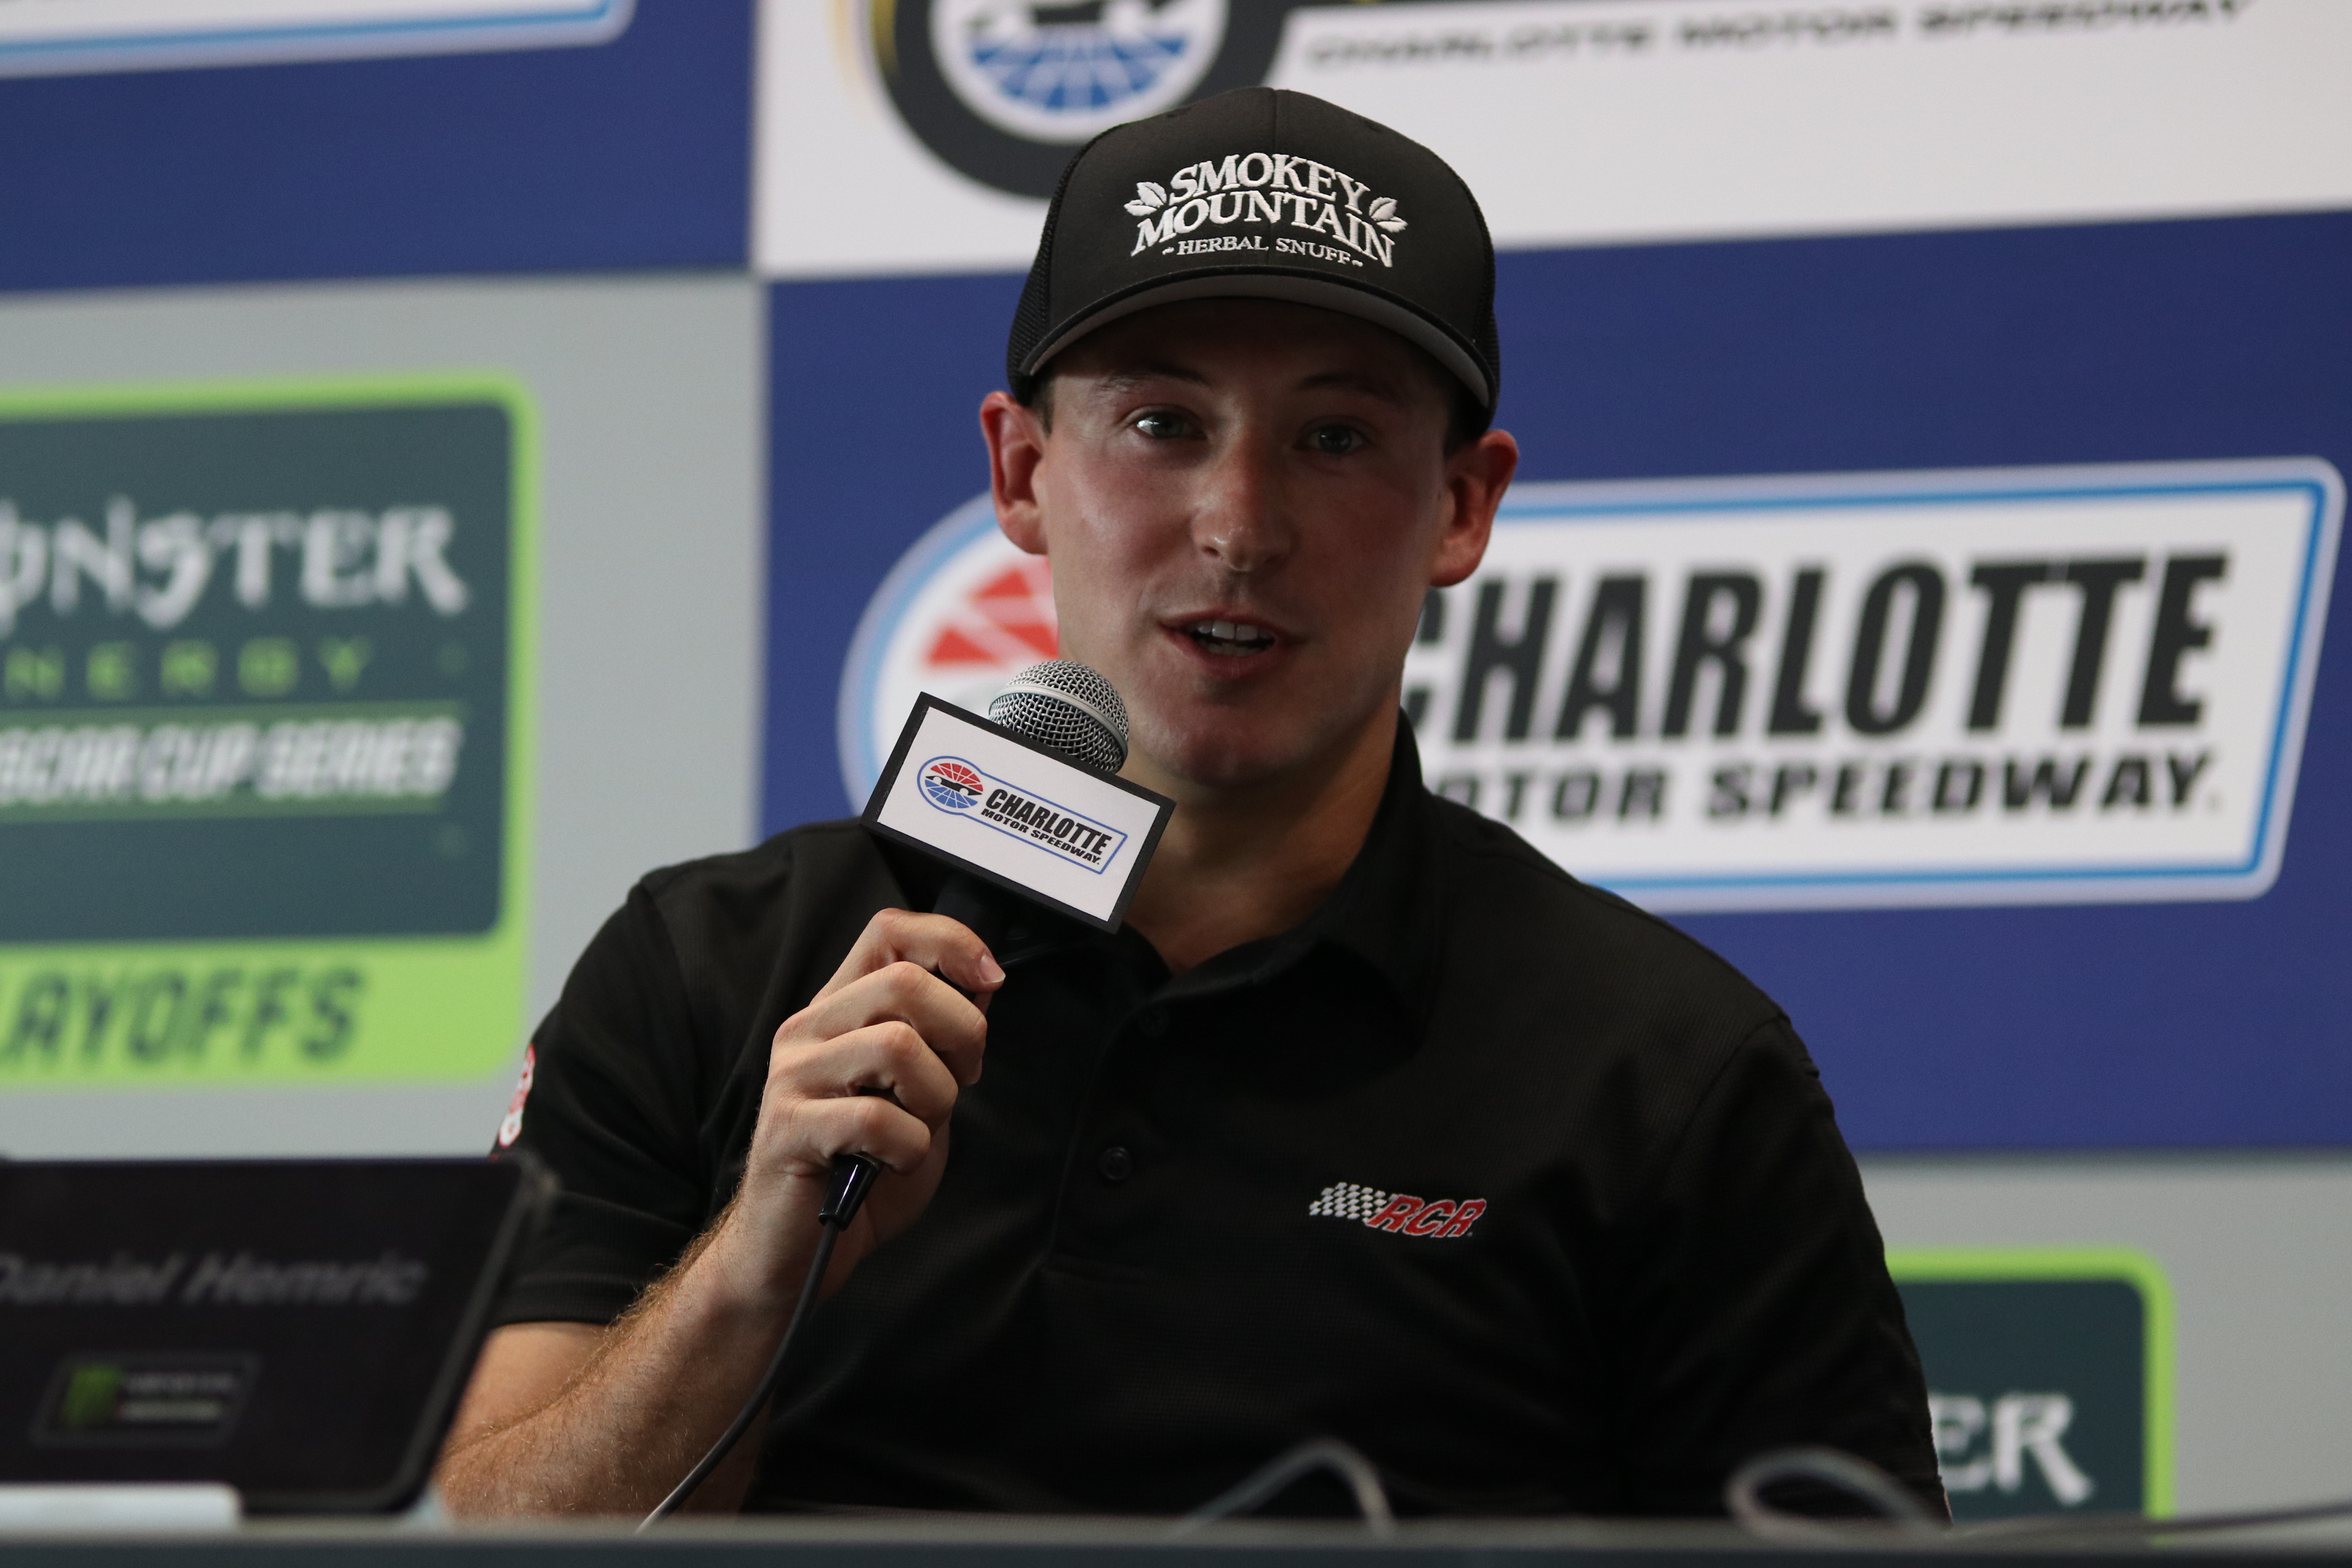 Carrying on the racing pride for Kannaspolis, NC, Daniel Hemric smiles about his promotion to Cup in 2019. (Photo Credit: Stephen Conley)